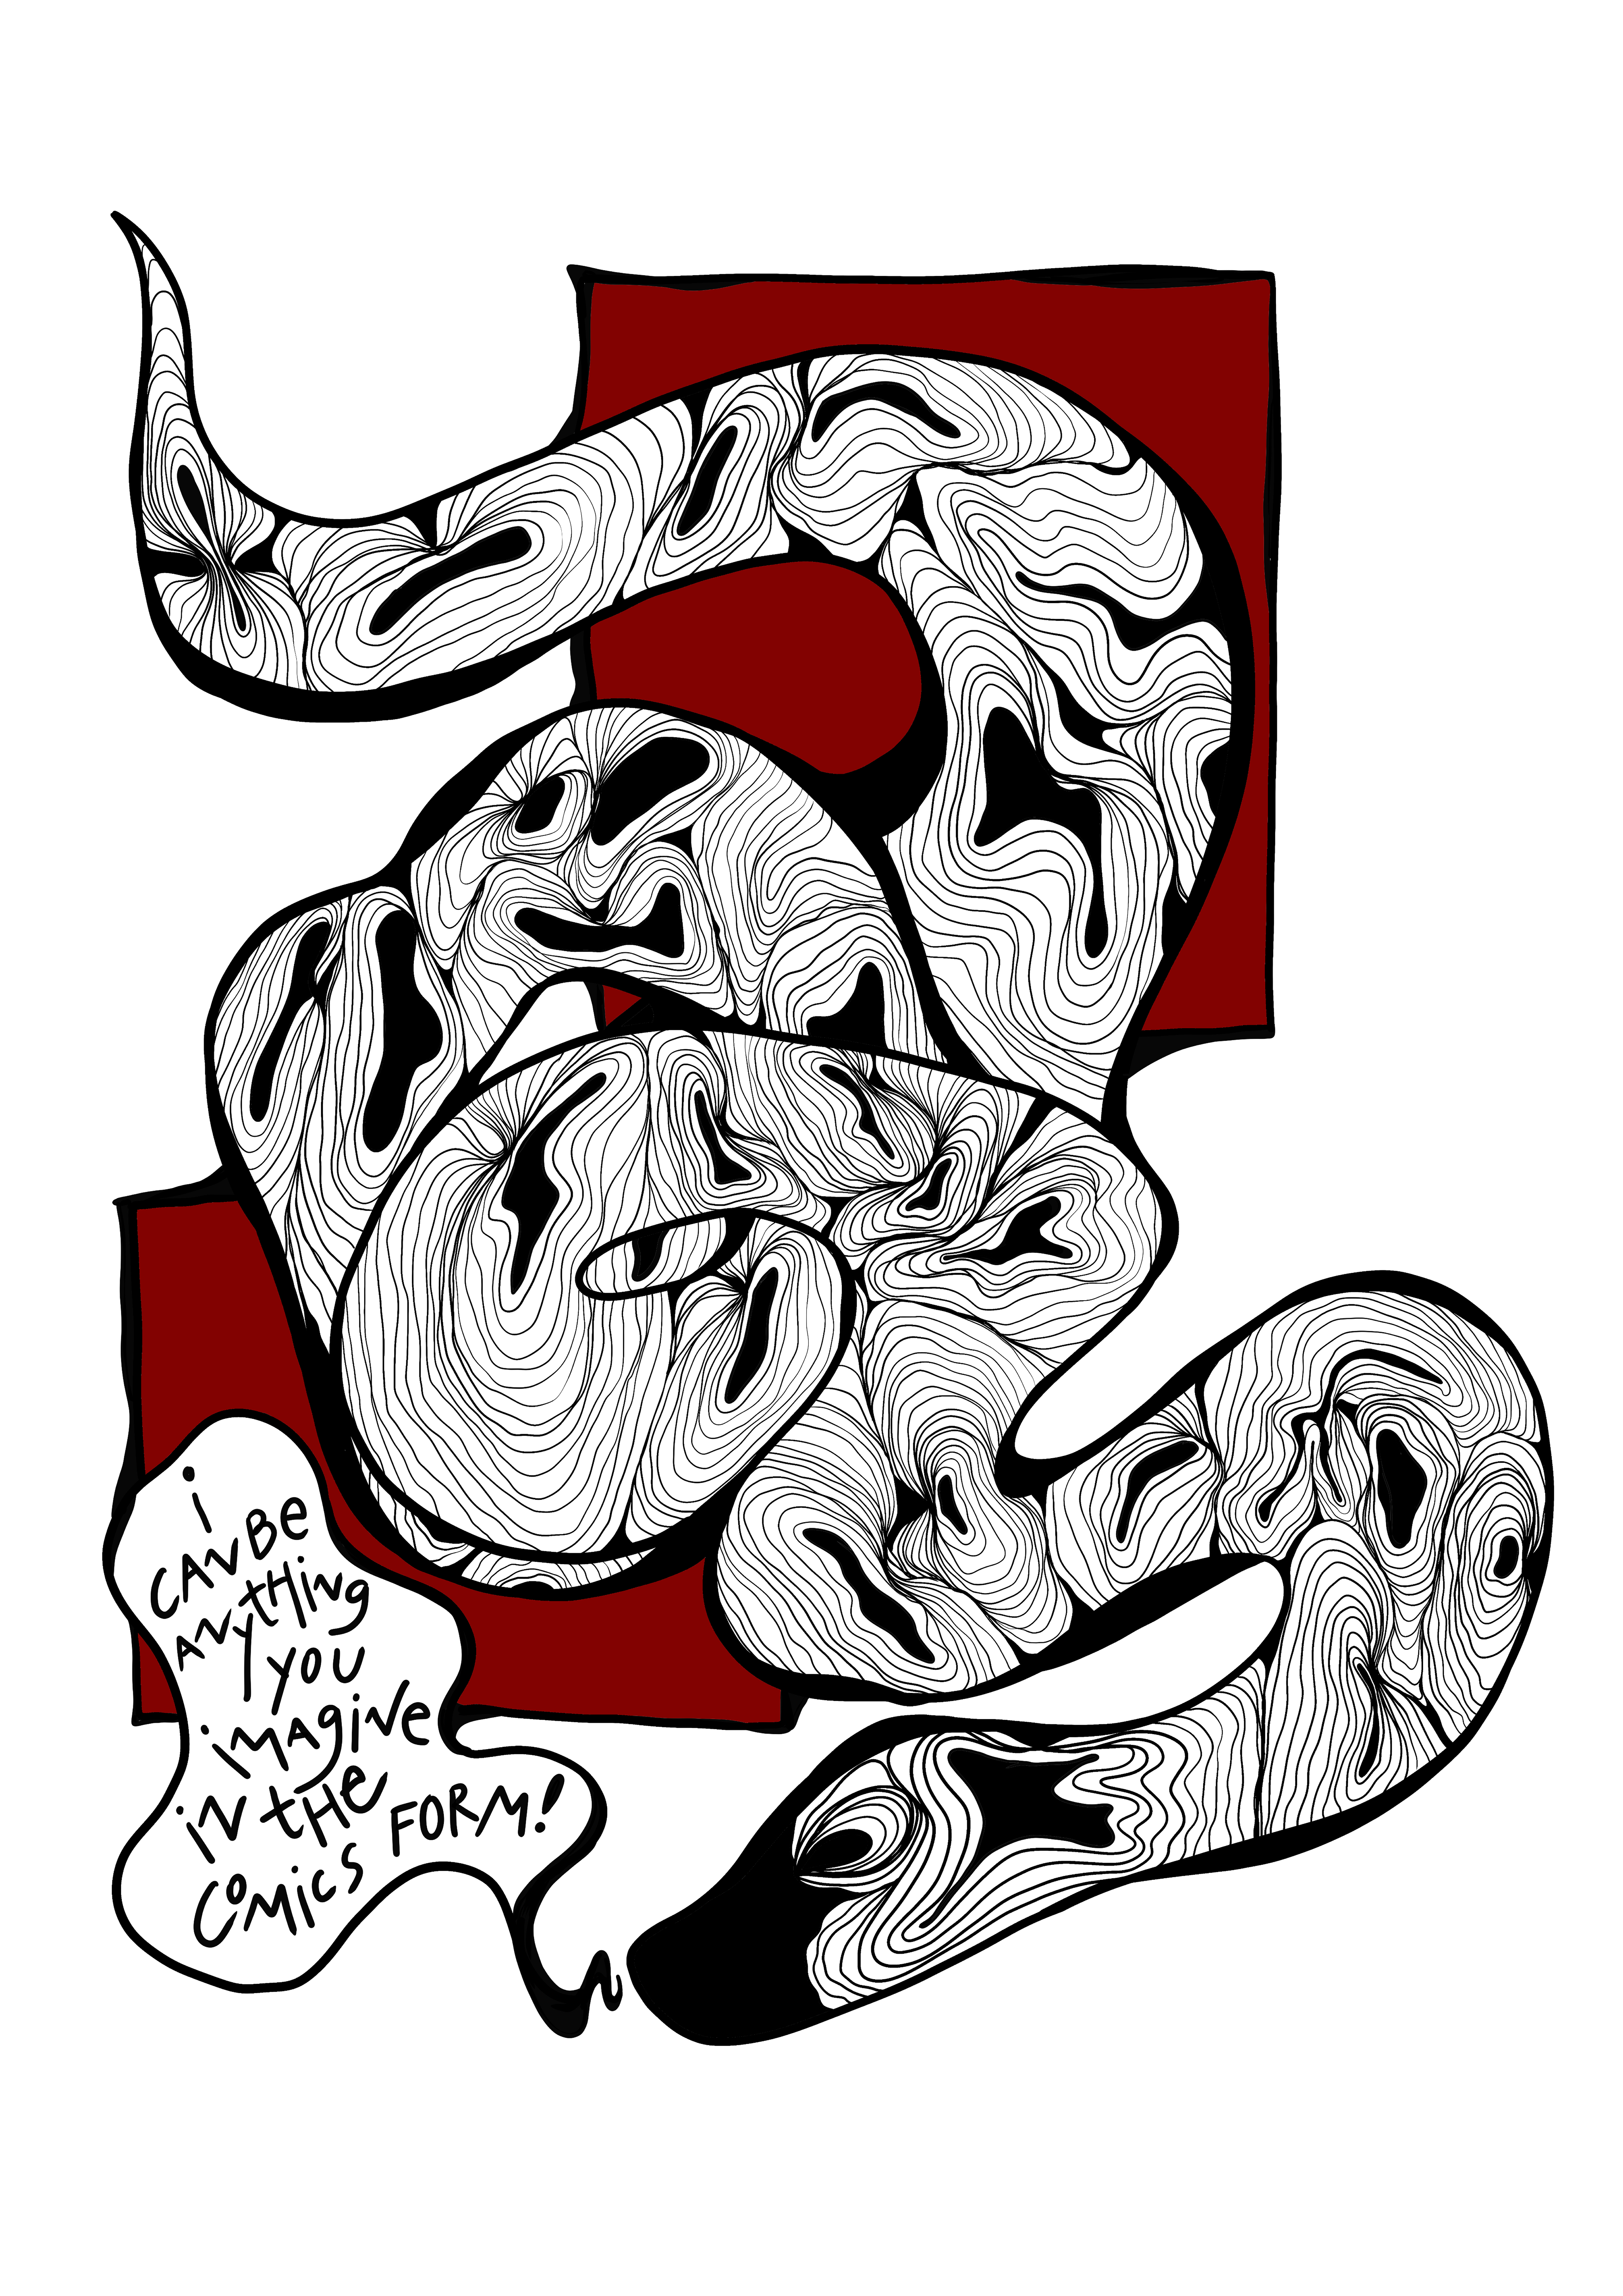 Snakes and Things: A Comic Exploration of Species through the COVID-19 Crisis